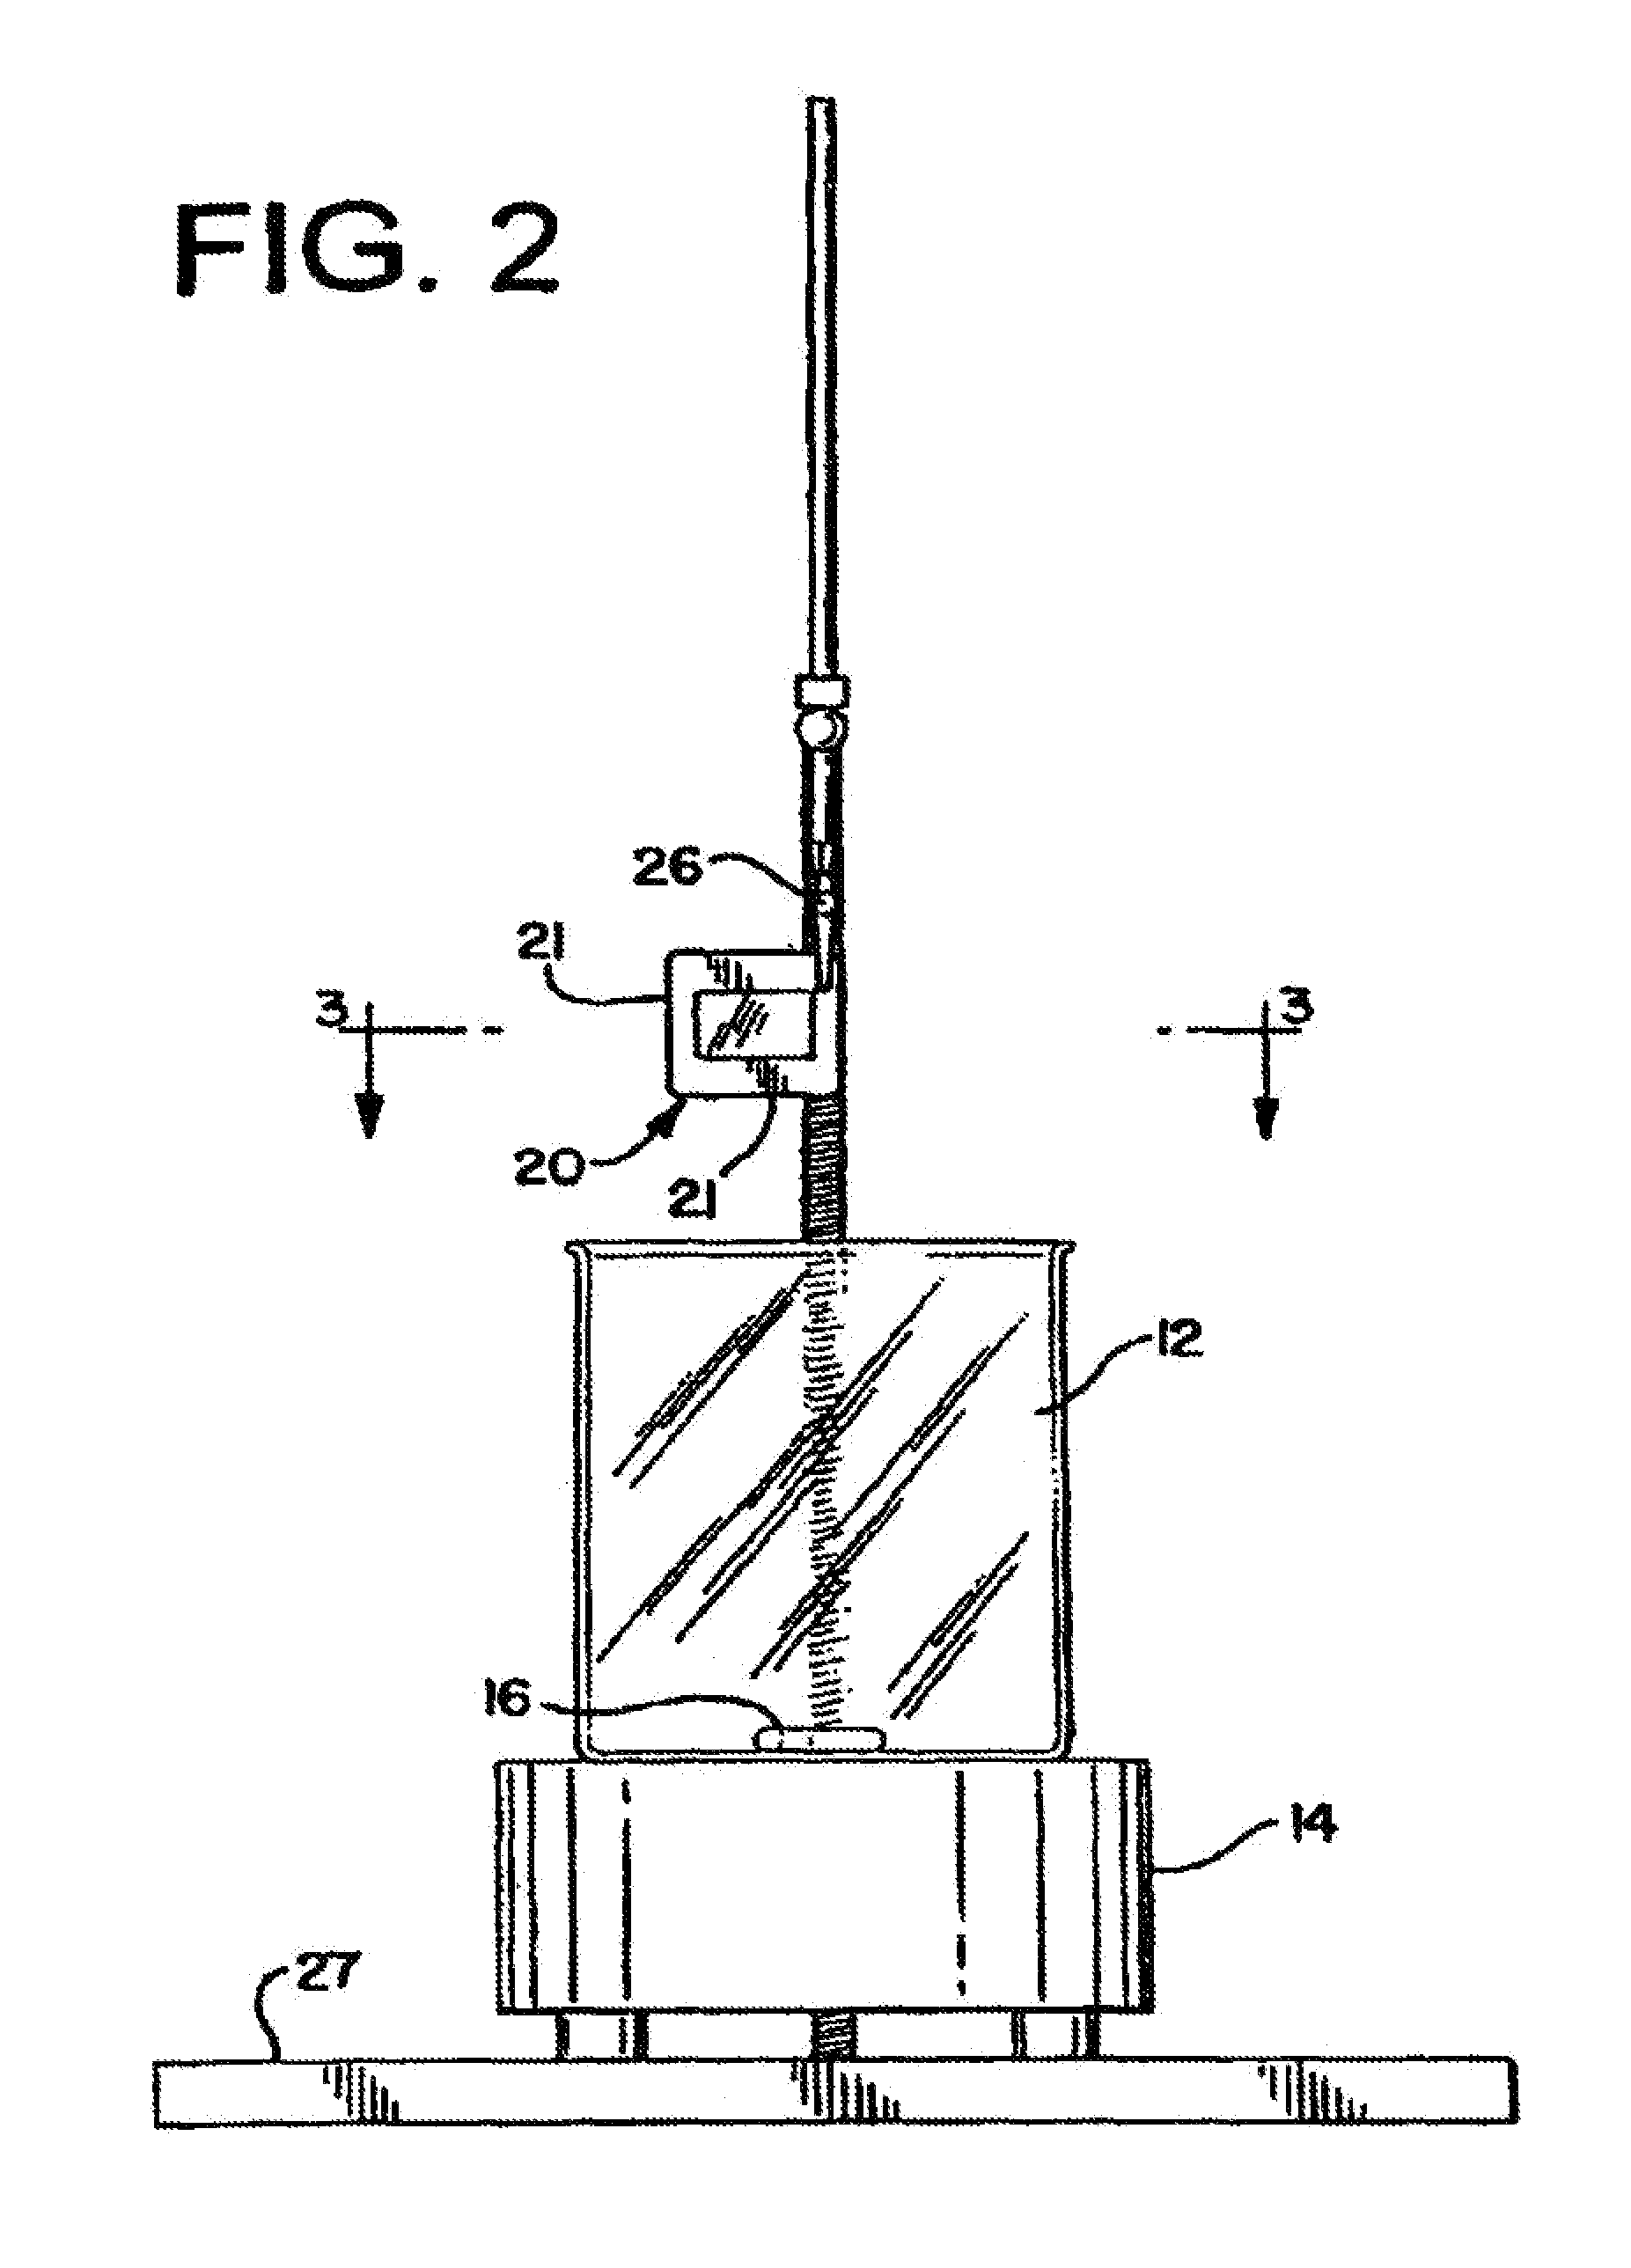 Water-soluble film having improved dissolution and stress properties, and packets made therefrom